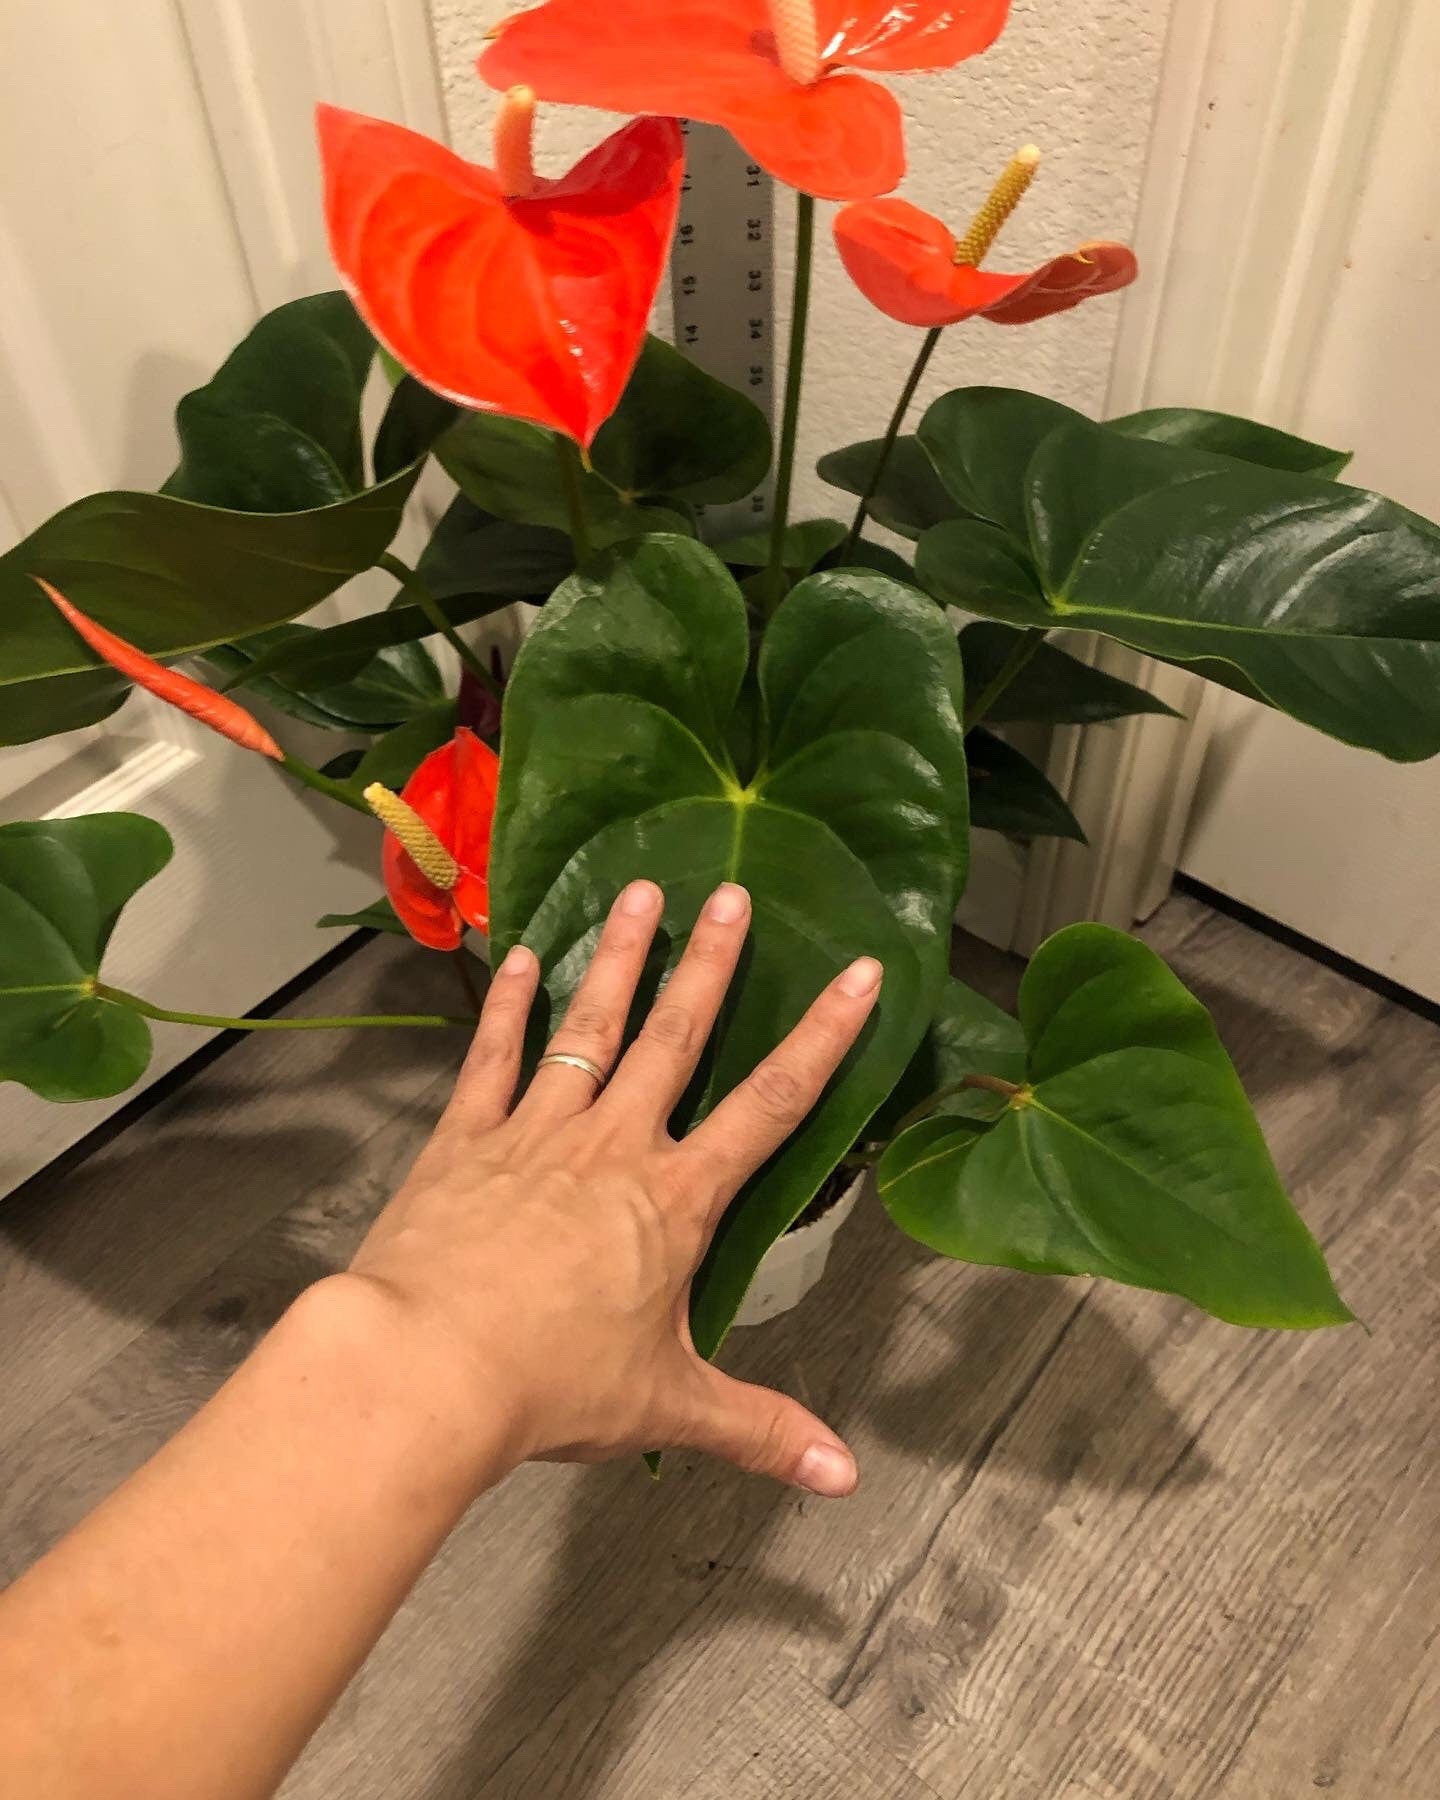 Xtra Large 1.5 ft to 2ft tall -6 inch pot - Neon Orange Anthurium easy care, air purifier-large leaves , large blooms-Anthurium Nebraska